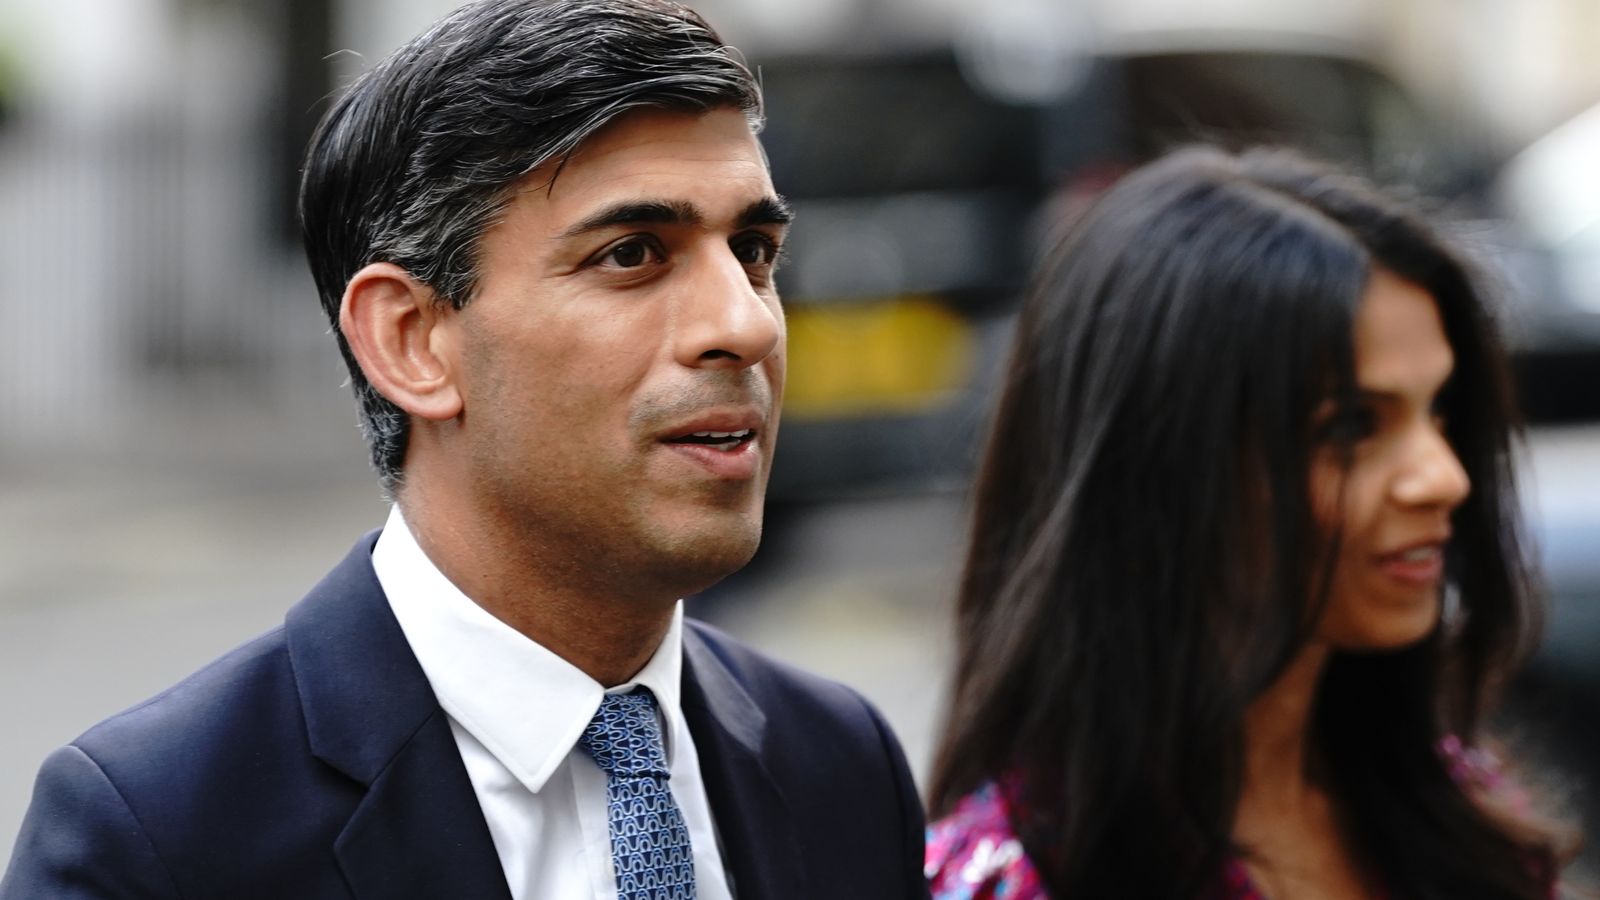 Rishi Sunak 'inadvertently' broke MP's code of conduct over wife's childcare interest